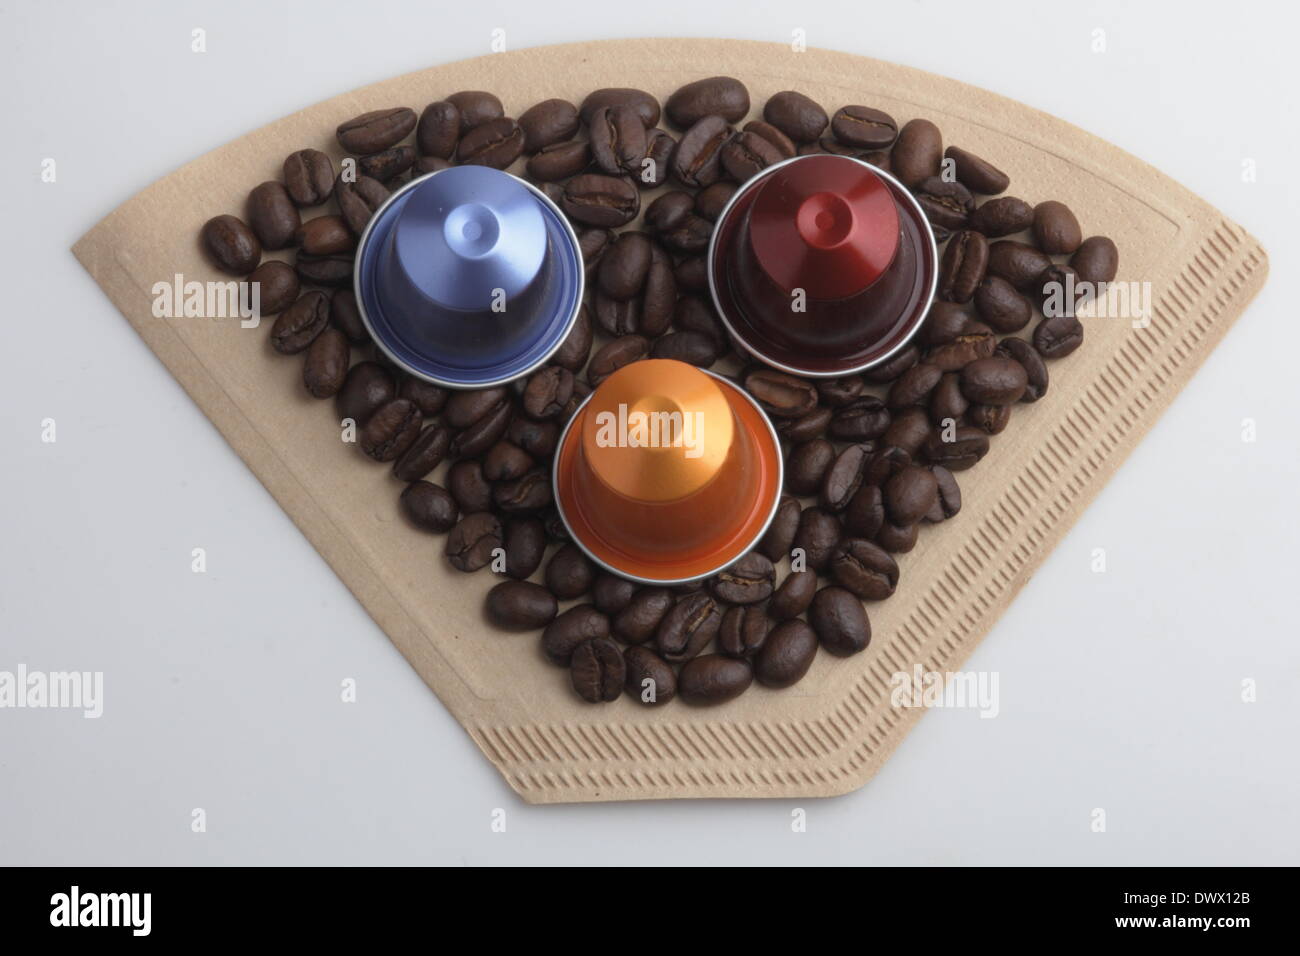 various coffee capsules, coffee beans and a filter paper Pictured 21.01.2014 Stock Photo